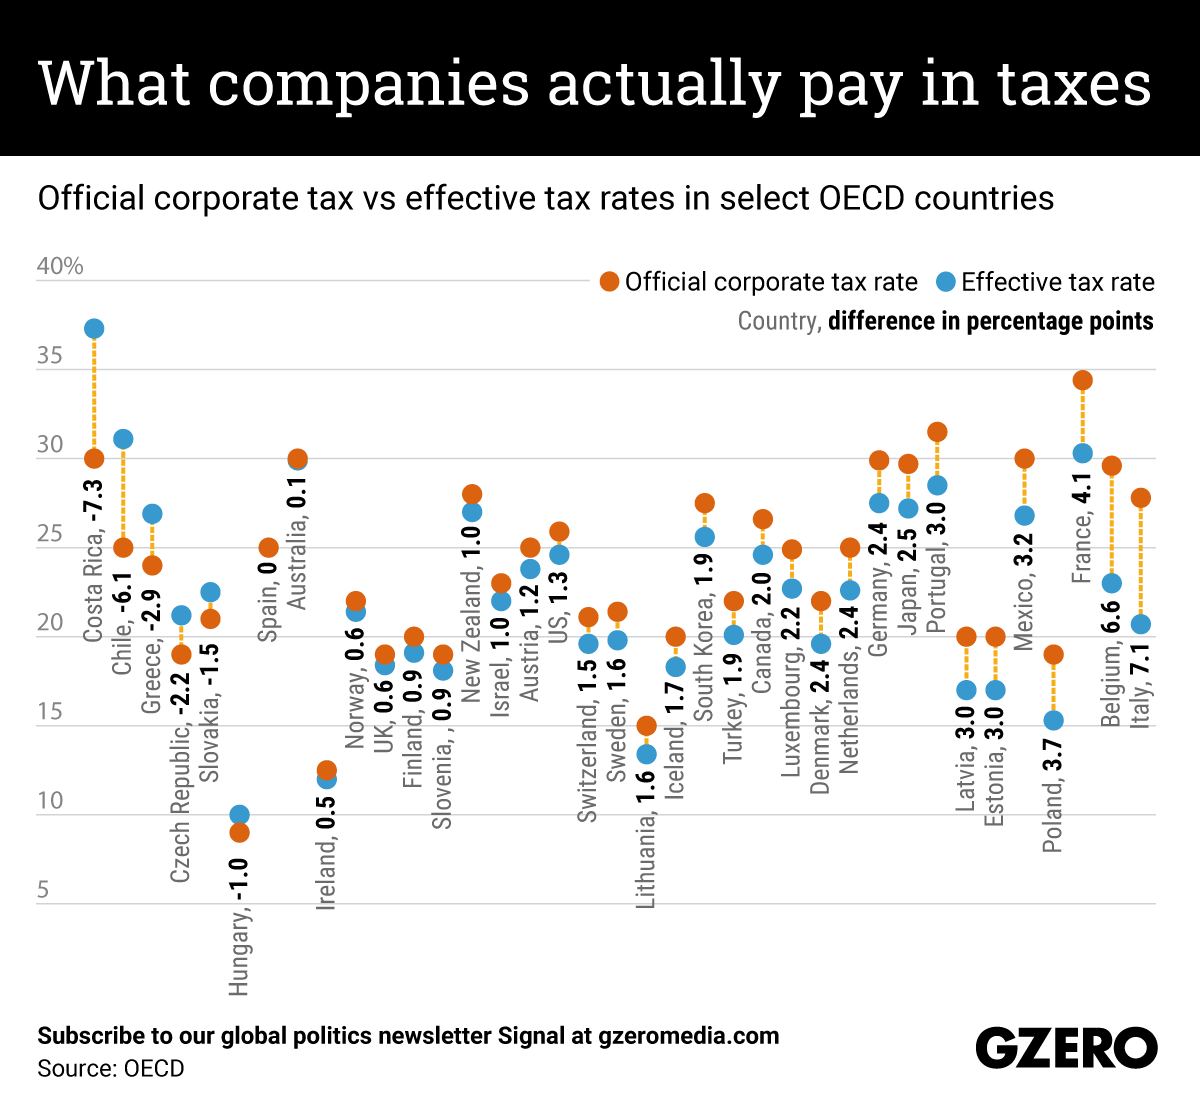 The Graphic Truth: What companies actually pay in taxes